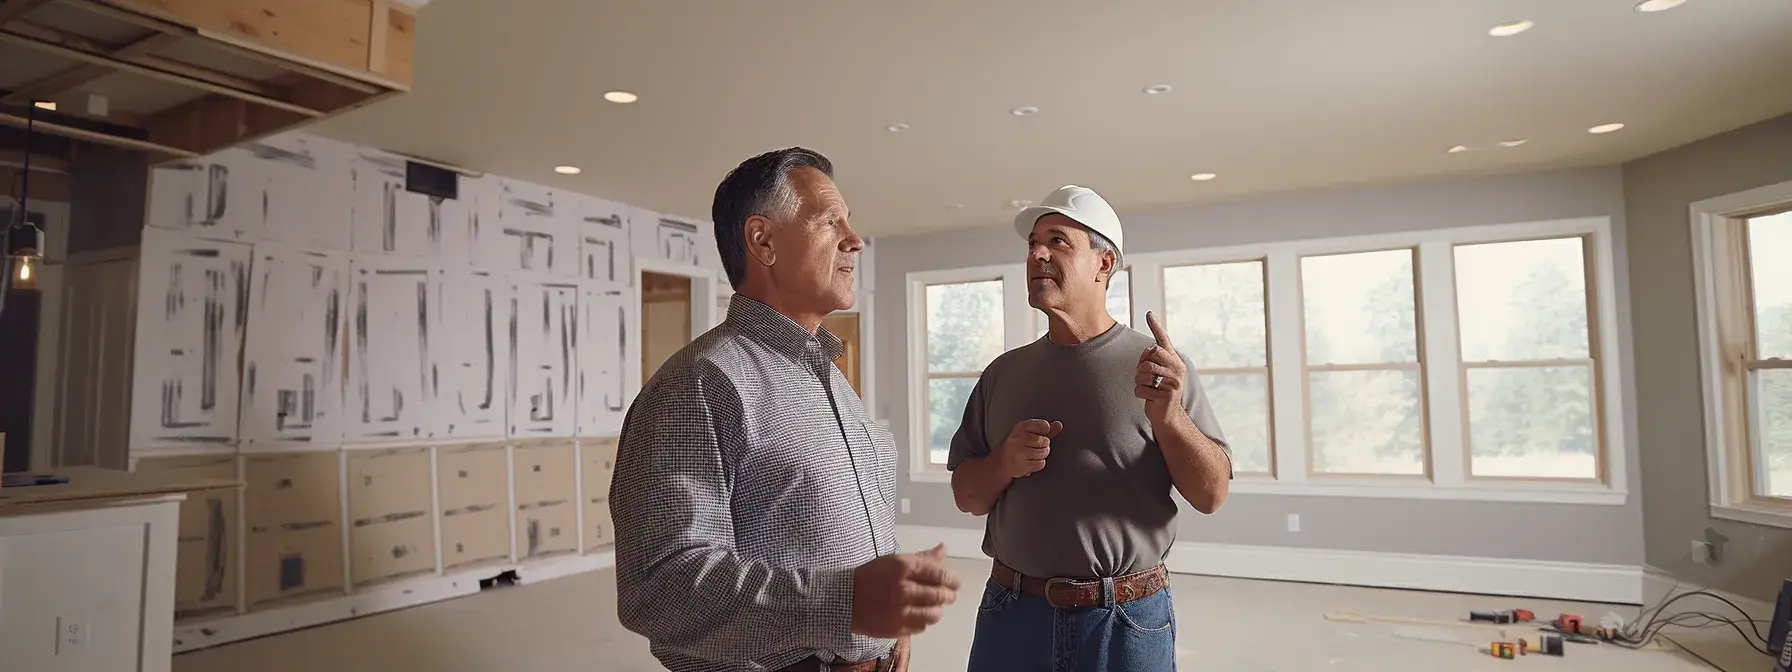 a professional drywall contractor discussing options with a homeowner in a basement.